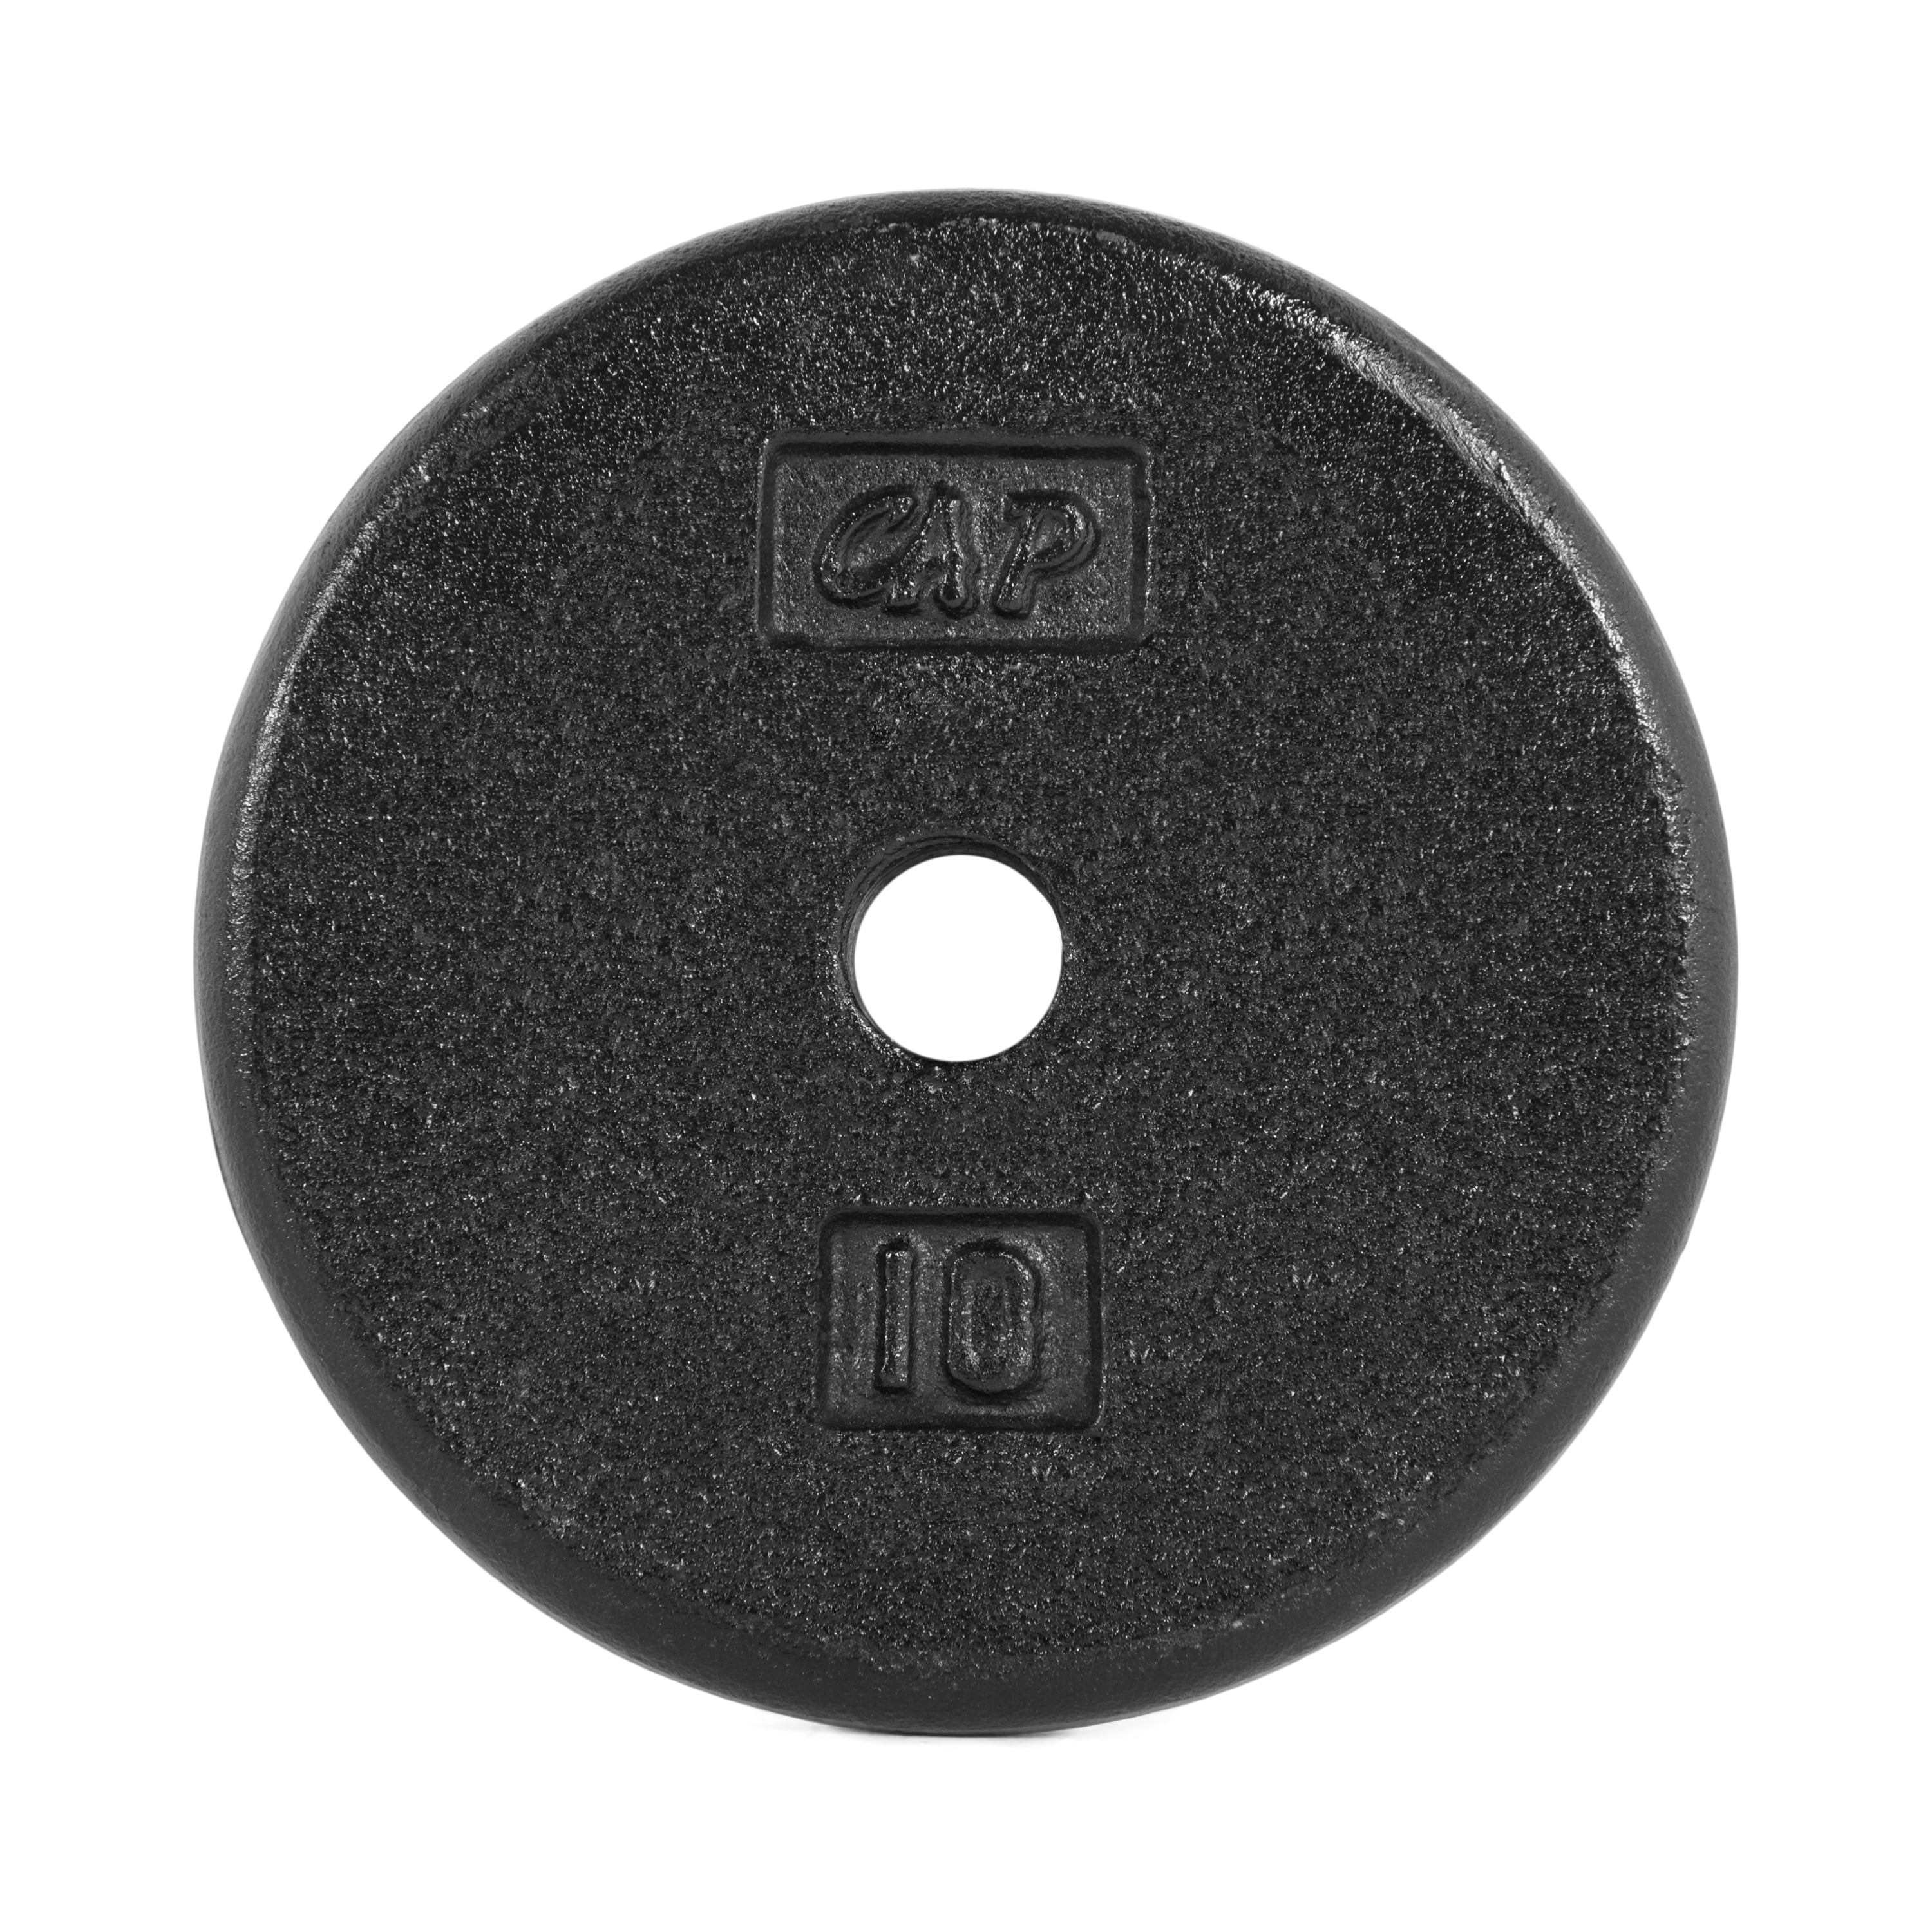 2x 10 LB CAP 2" Olympic Hole Cast Iron Weight Plates Pair Set of 2 20lbs Total 